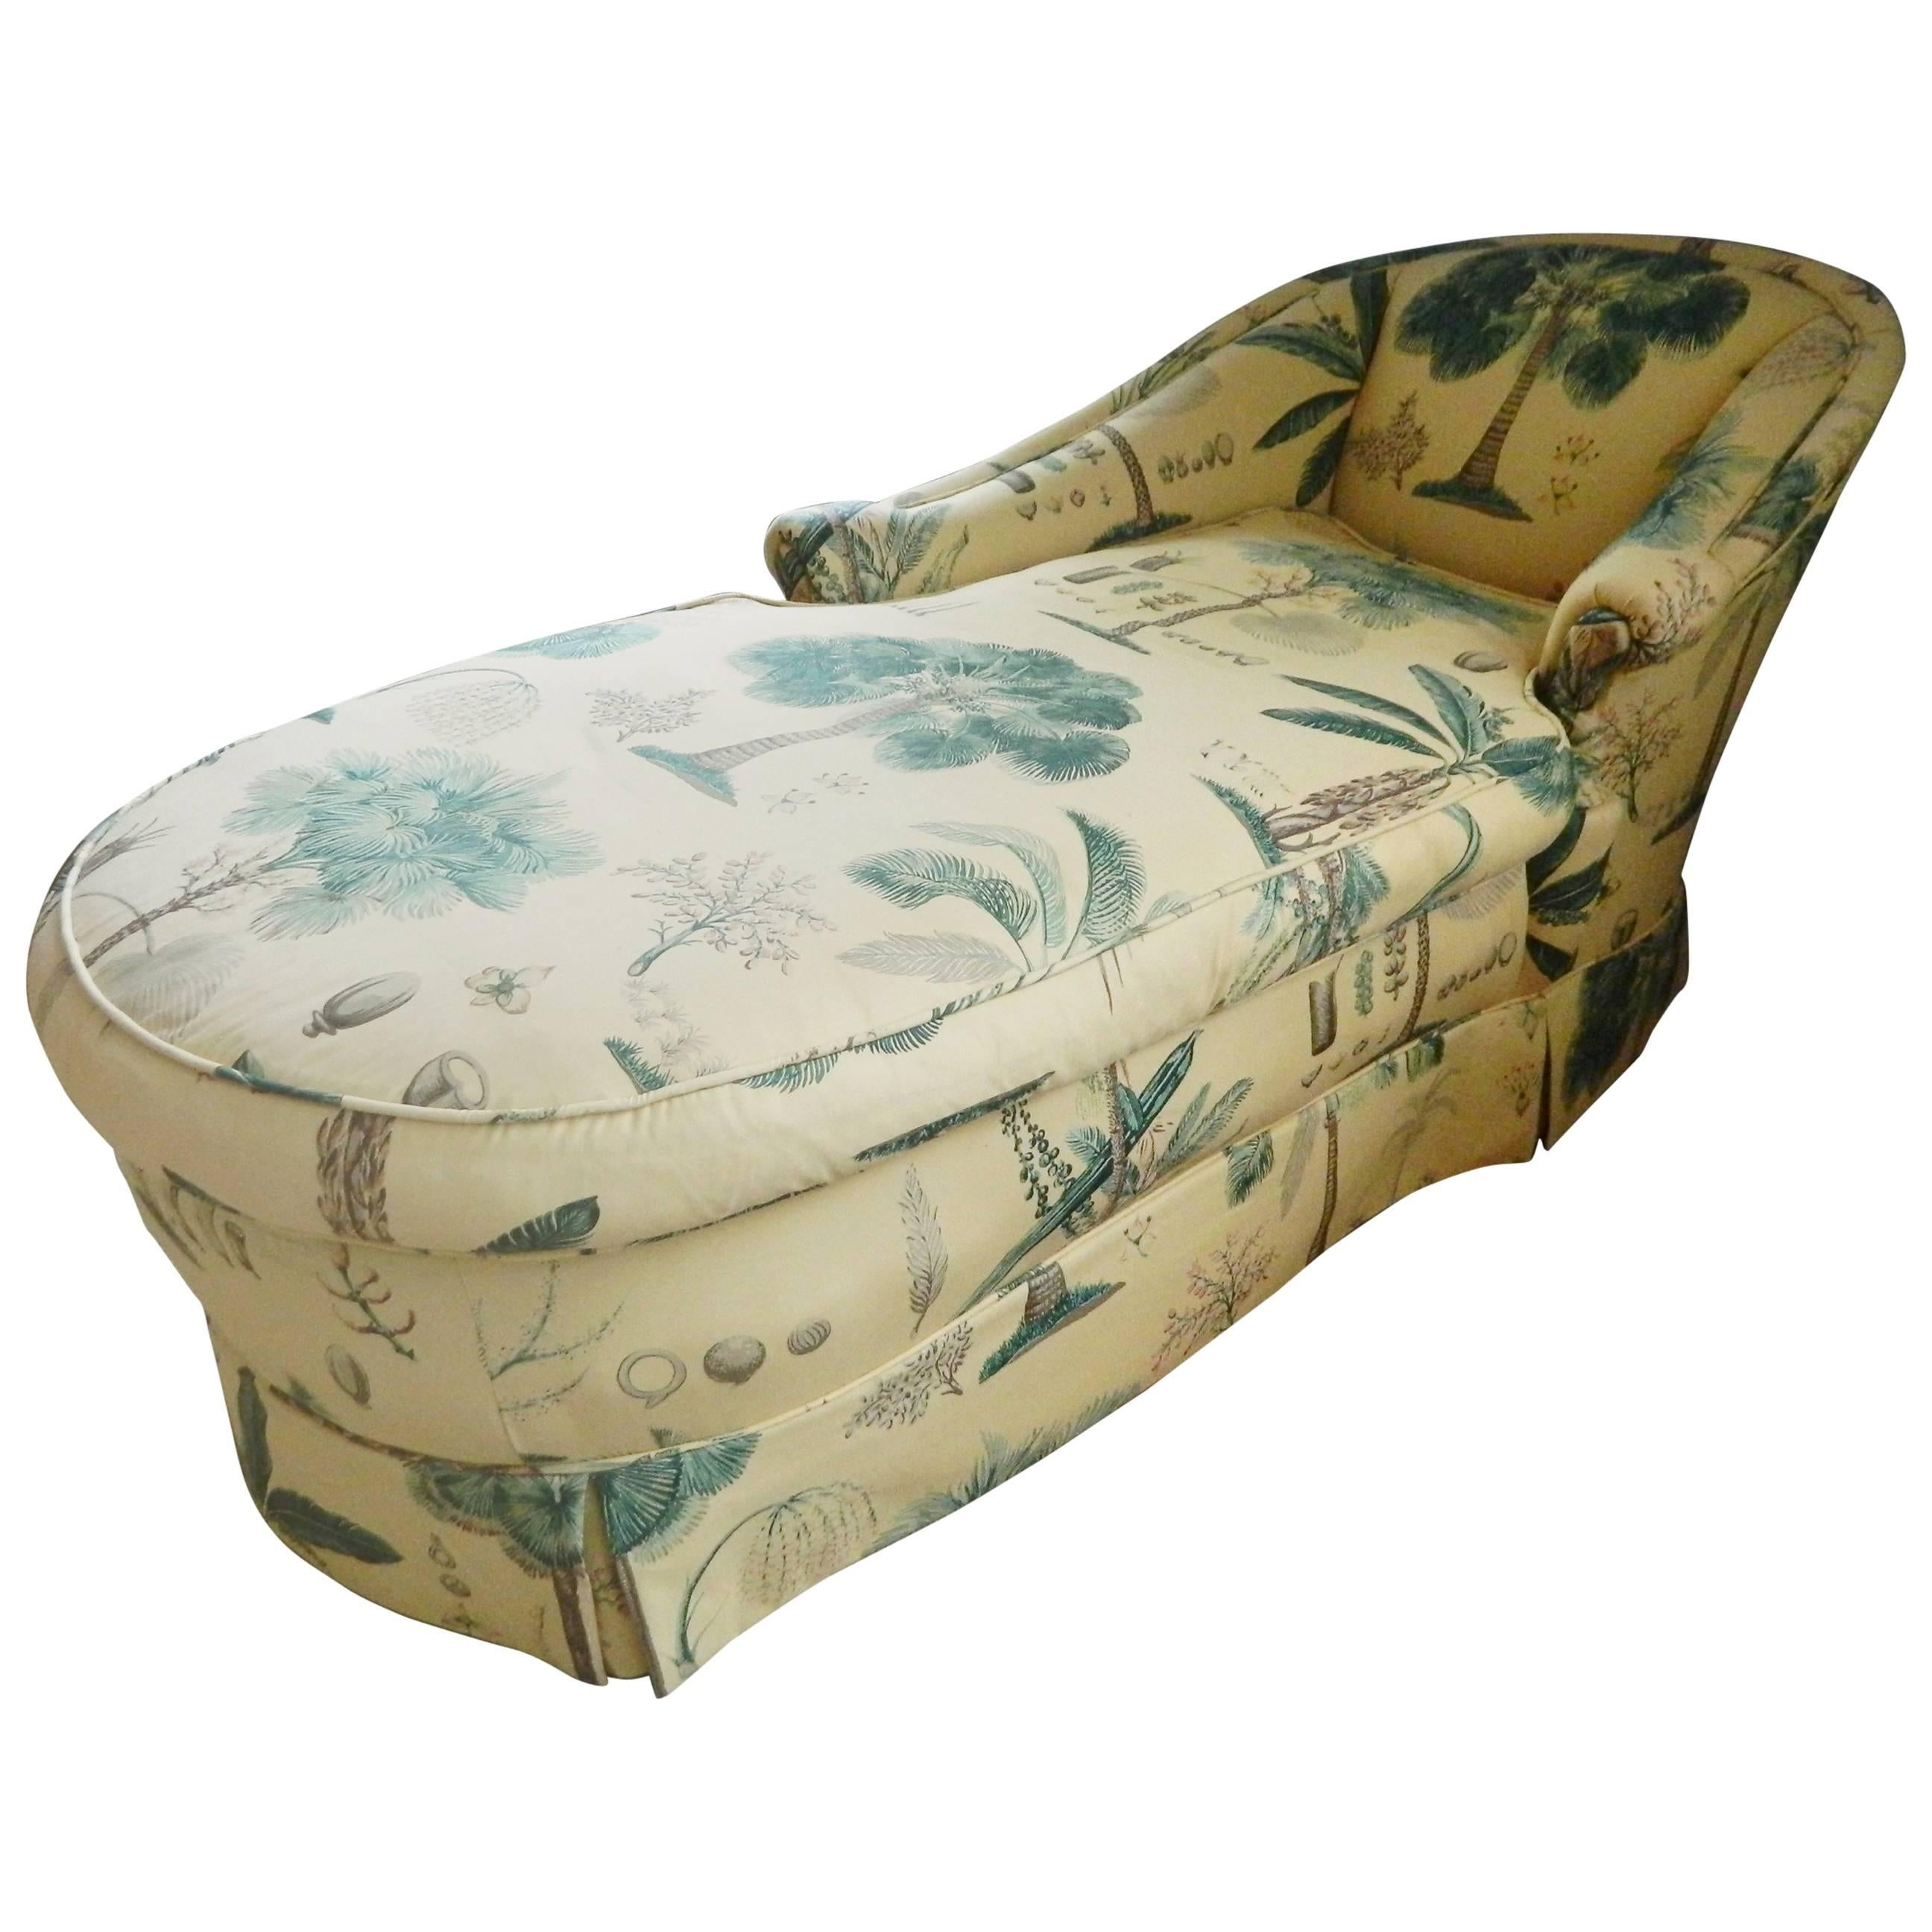 Upholstered Chaise Lounge, Mid-20th Century